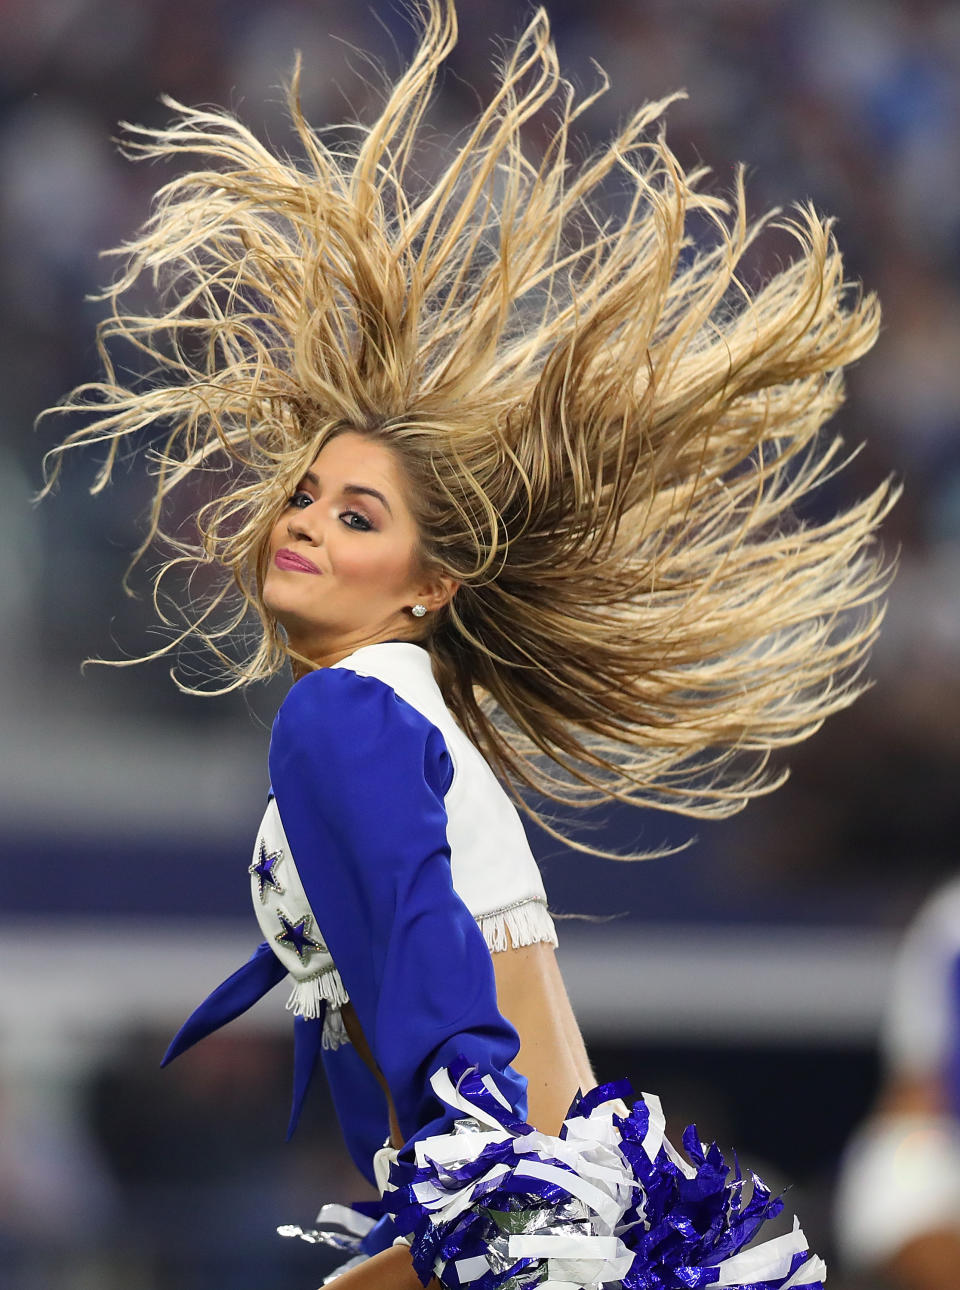 <p>A Dallas Cowboys Cheerleader performs during a game against the New York Giants at AT&T Stadium on September 10, 2017 in Arlington, Texas. (Photo by Tom Pennington/Getty Images) </p>